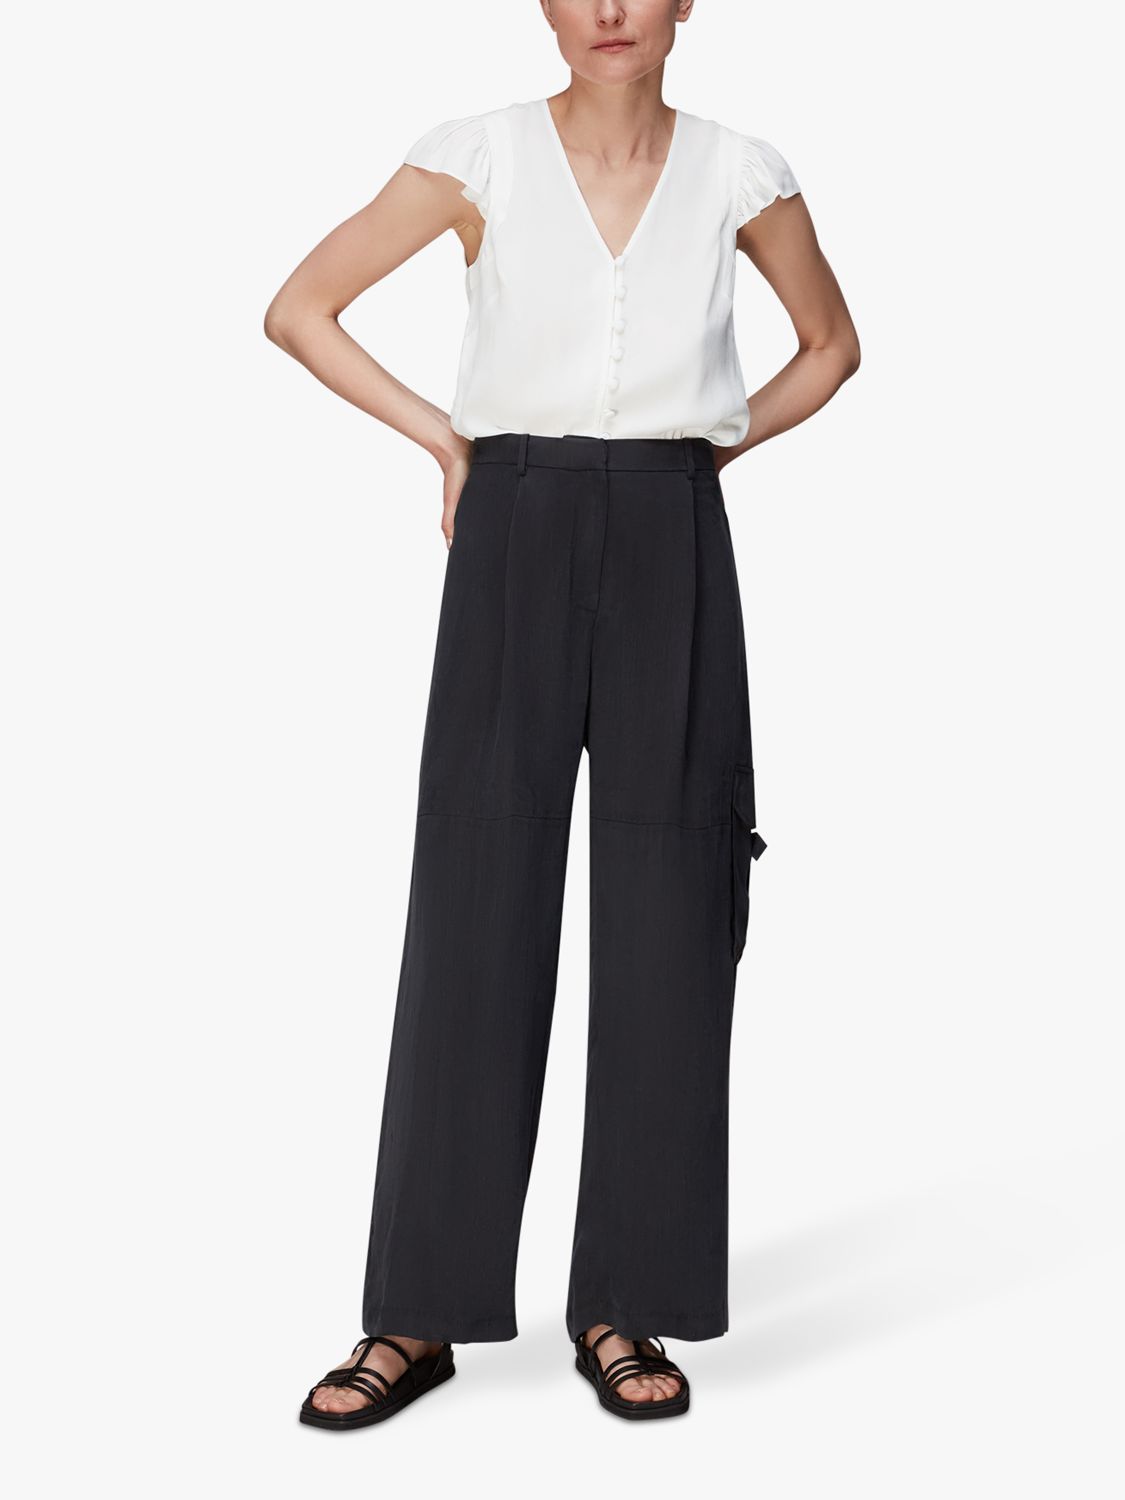 Whistles Frill Sleeve Top, White at John Lewis & Partners